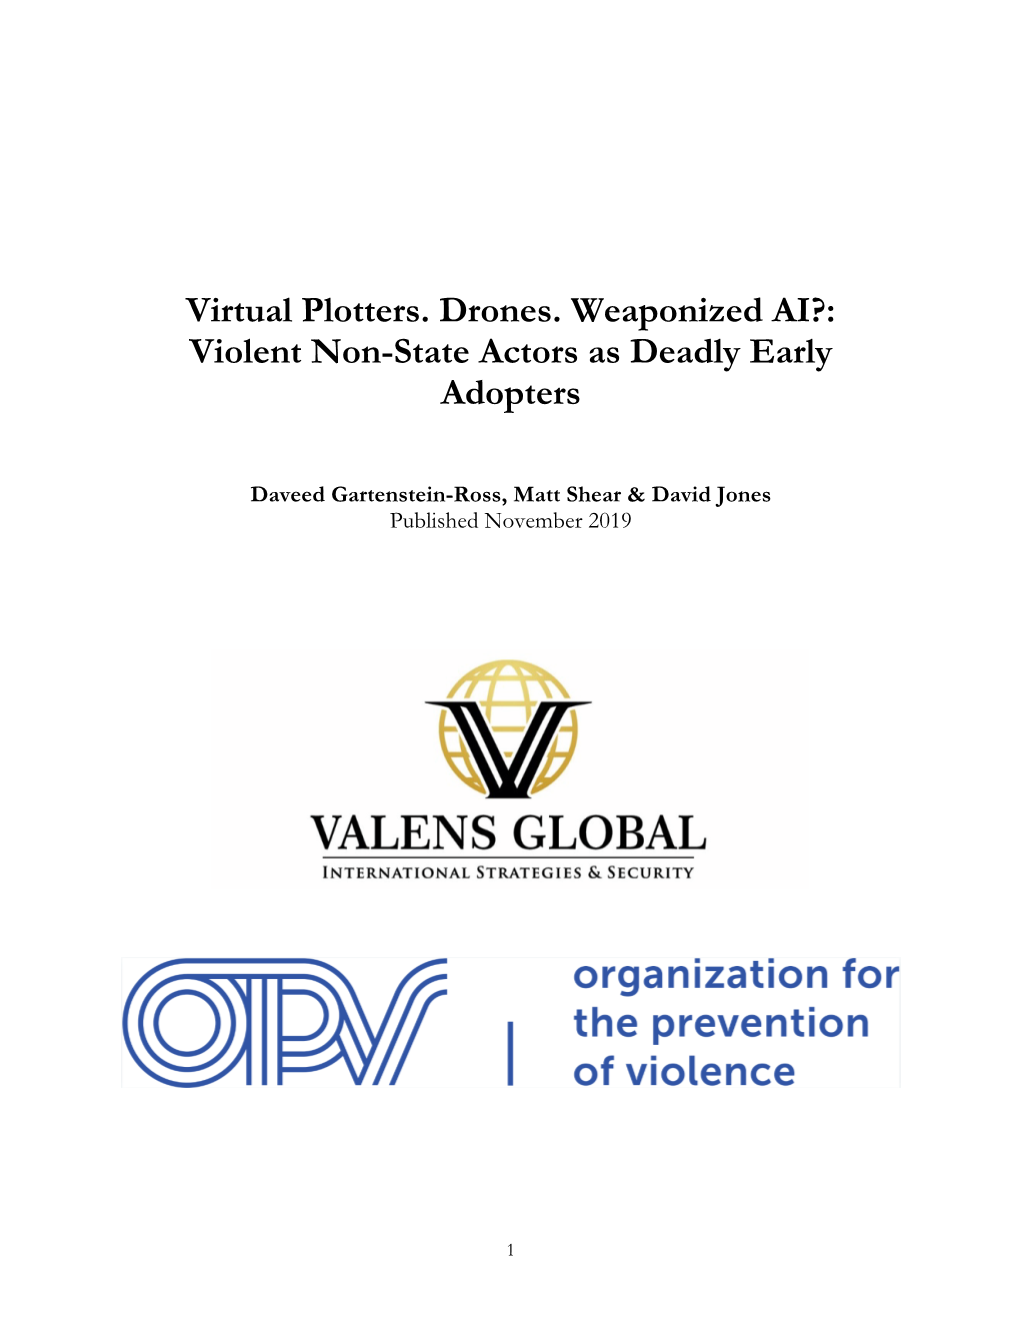 Virtual Plotters. Drones. Weaponized AI?: Violent Non-State Actors As Deadly Early Adopters